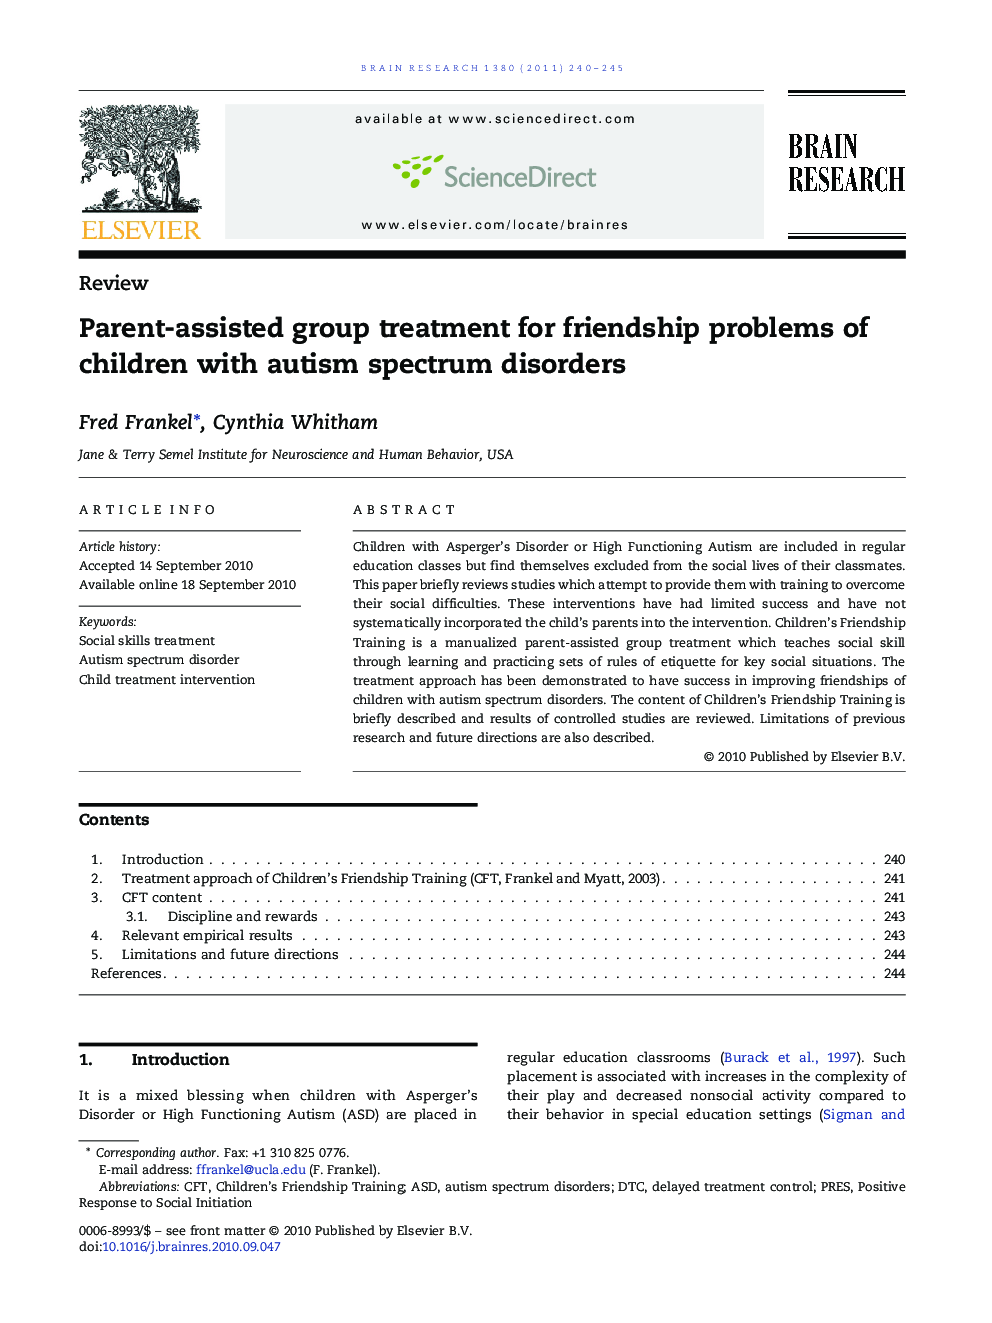 Parent-assisted group treatment for friendship problems of children with autism spectrum disorders